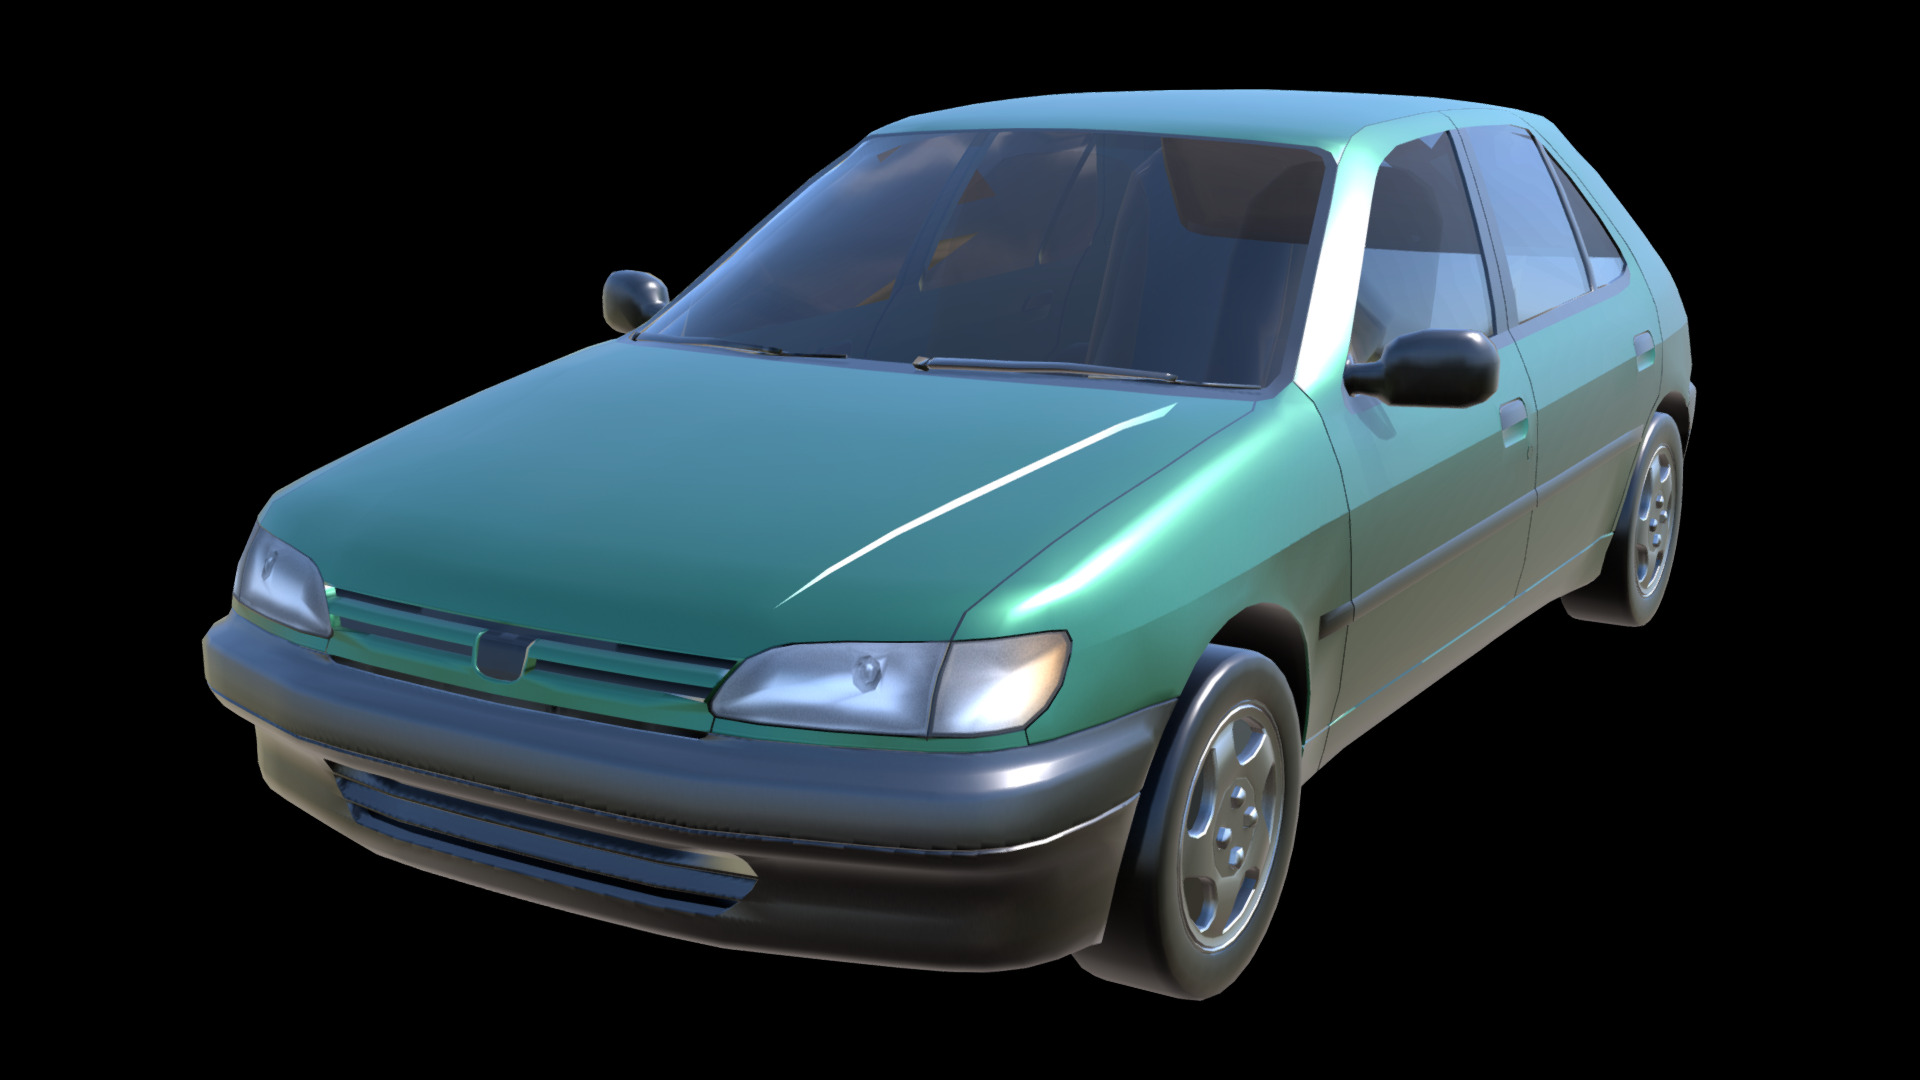 3D model Peugeot 306 5 door - This is a 3D model of the Peugeot 306 5 door. The 3D model is about a car parked on a black background.